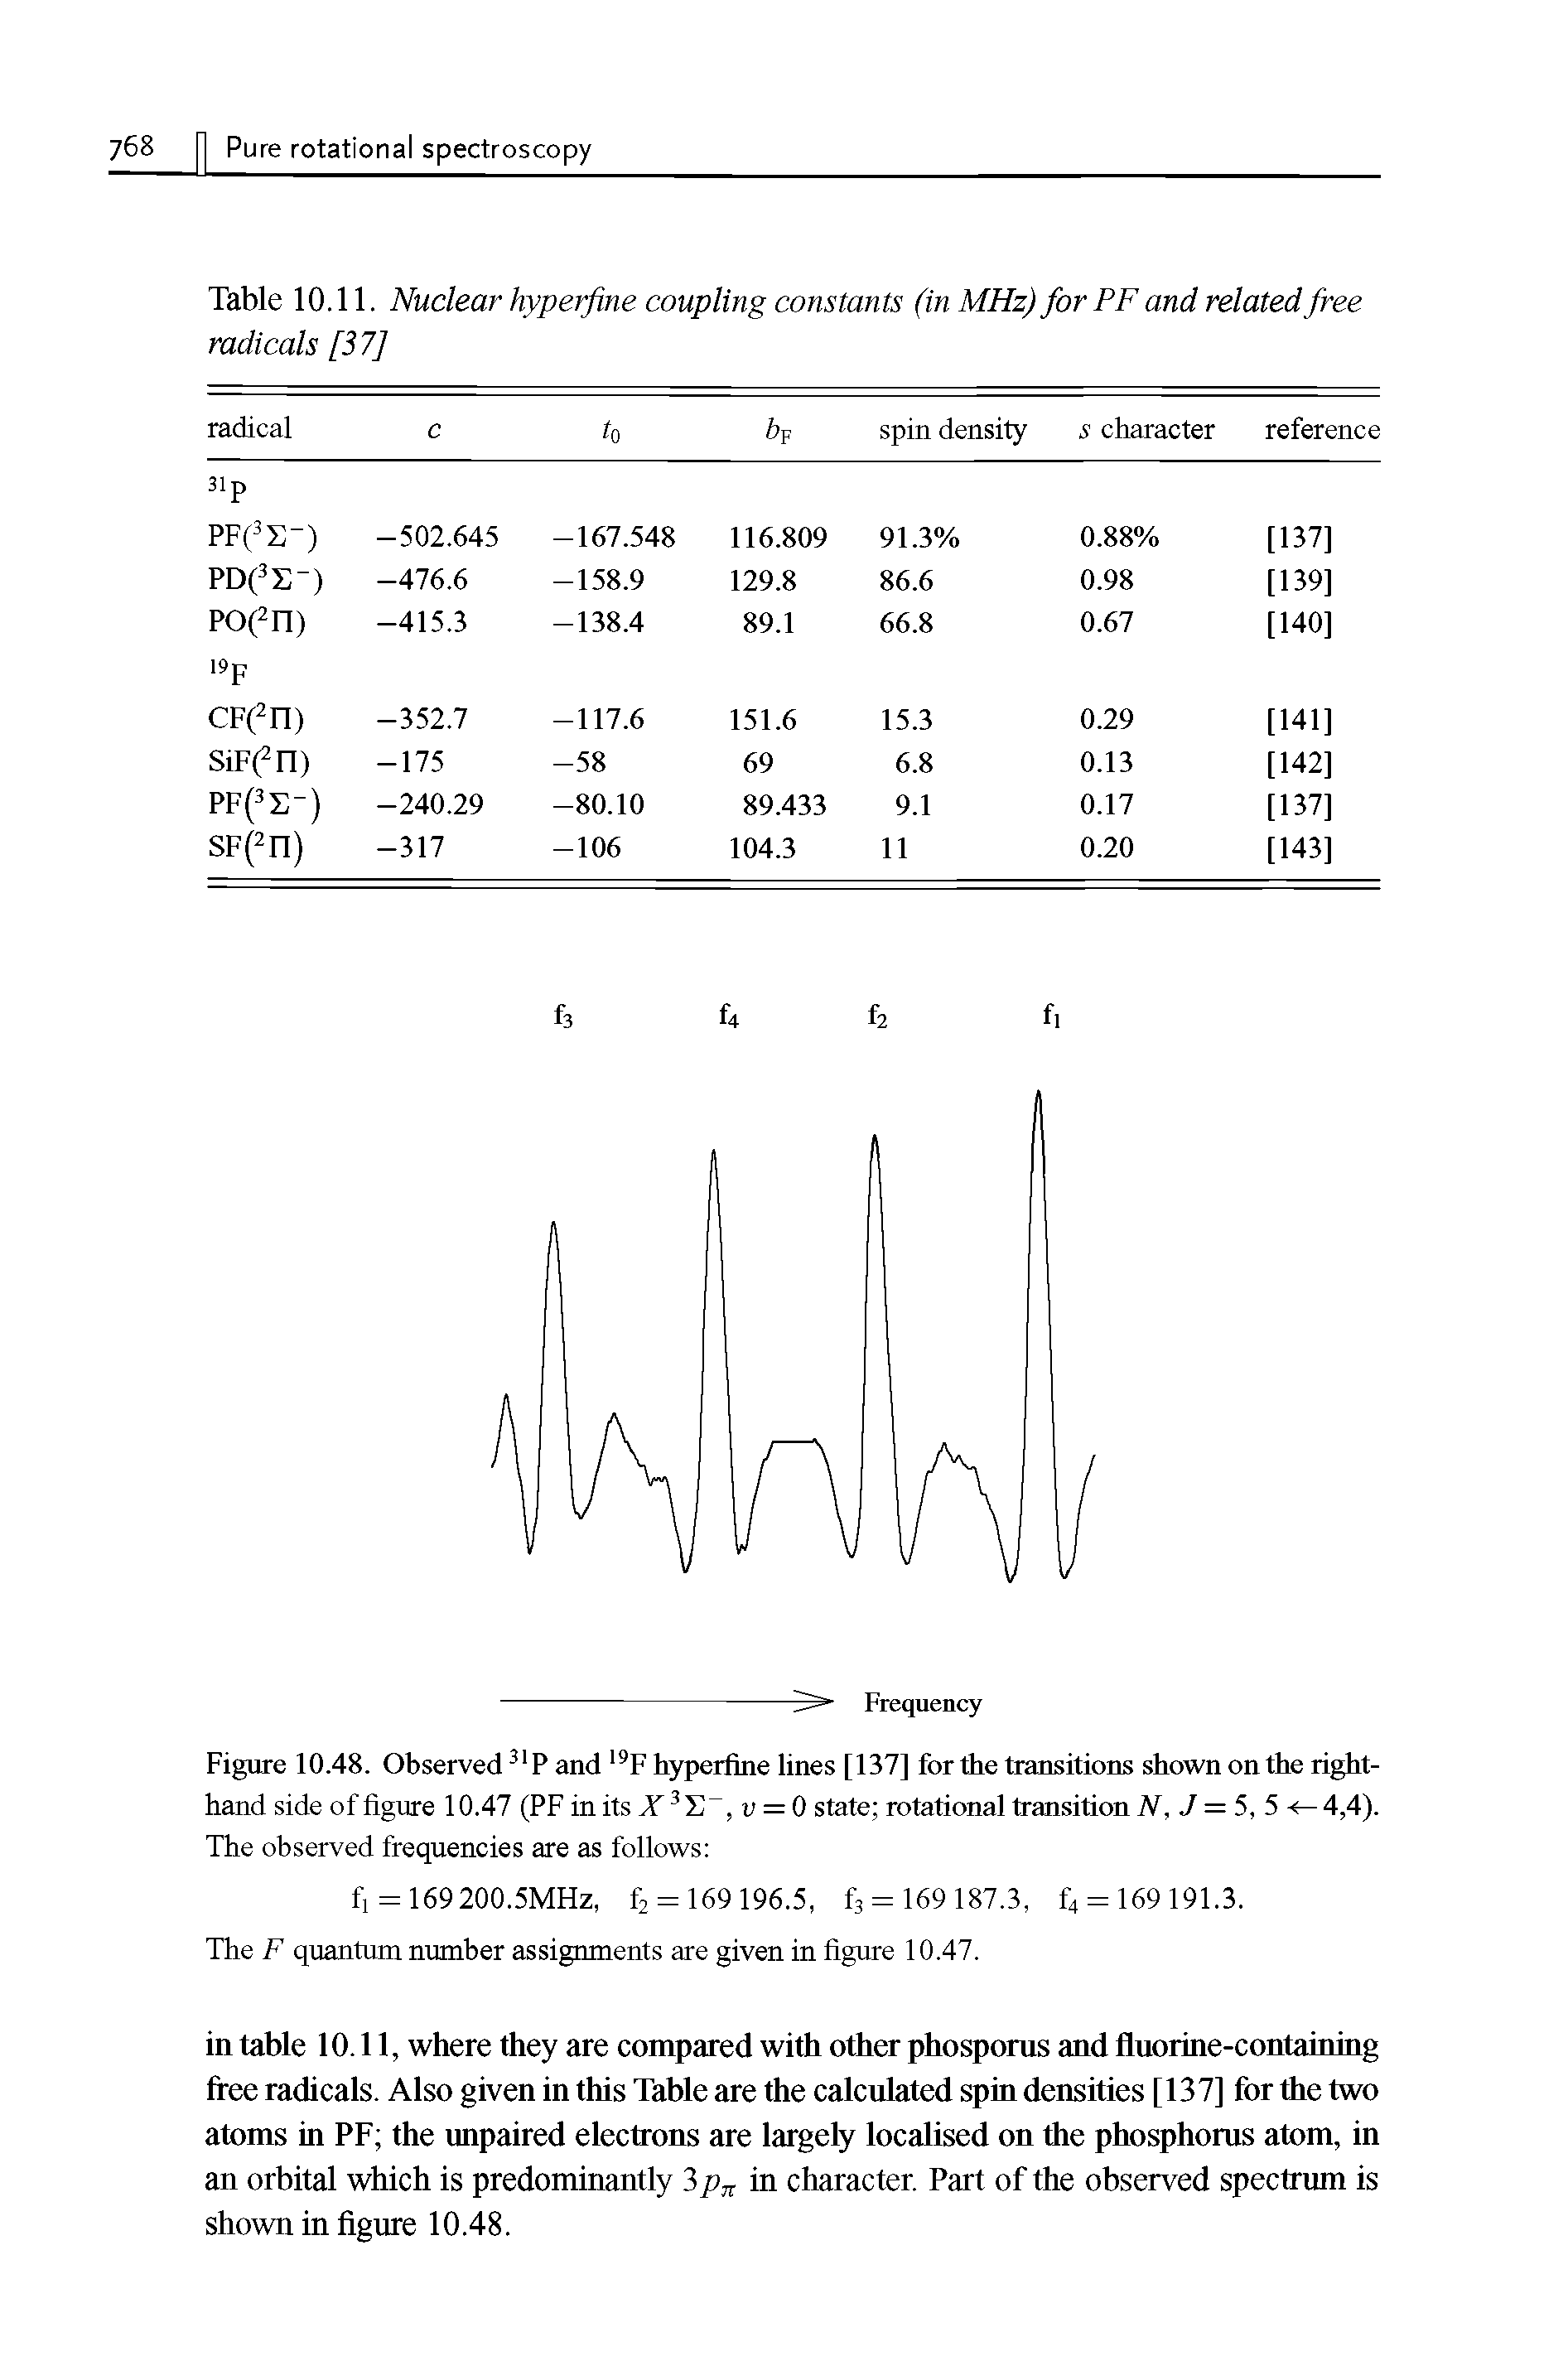 Table 10.11. Nuclear hyperfine coupling constants (in MHz) for PF and related free radicals [37]...